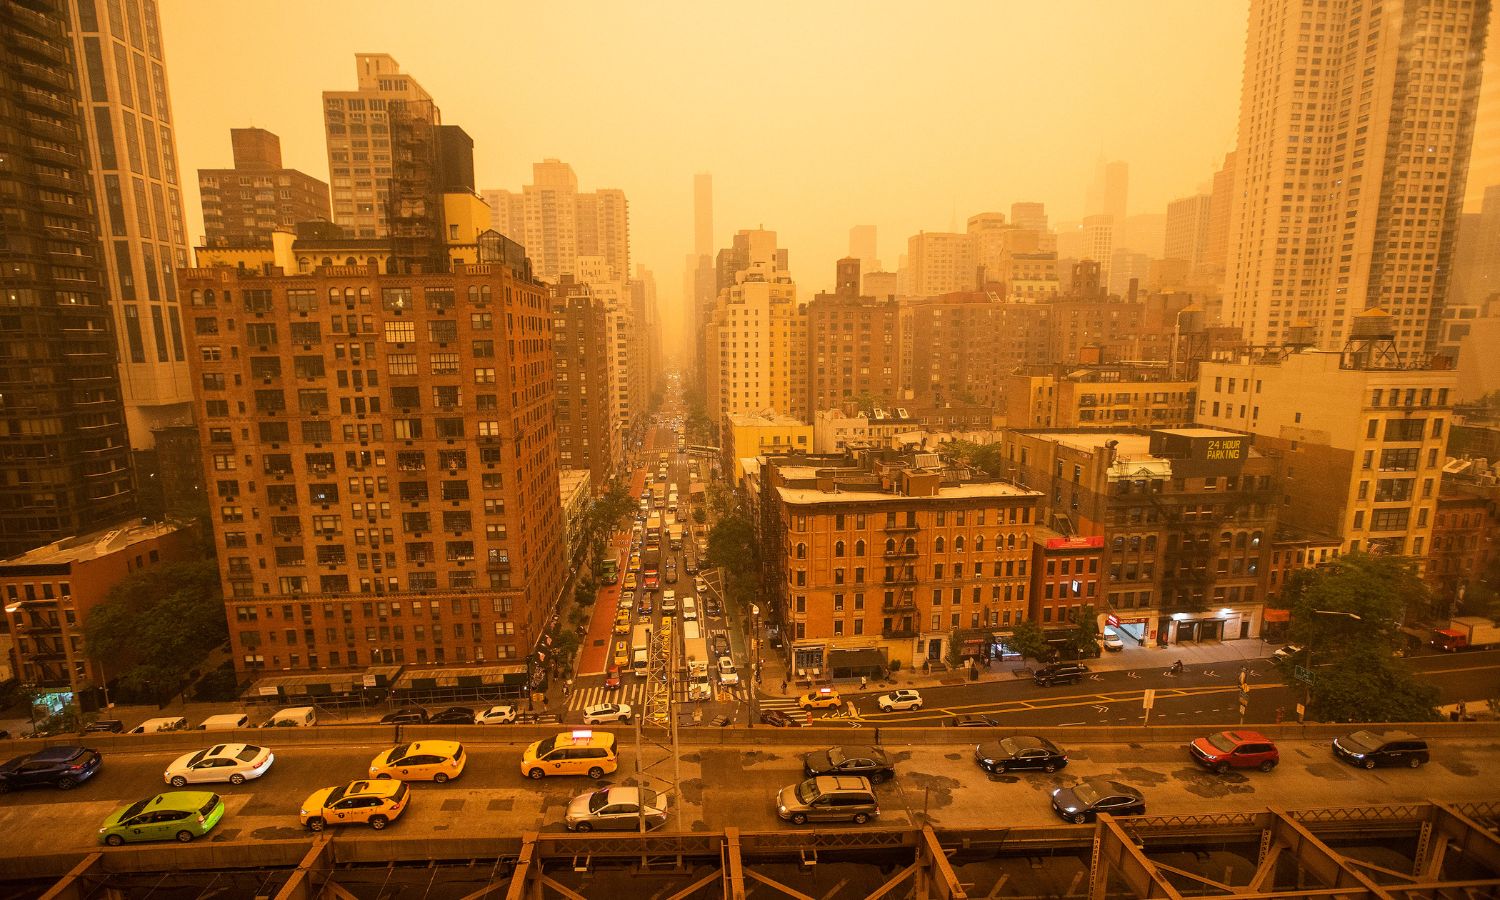 An Image showing downtown new york in which the city is engulfed in smoke.